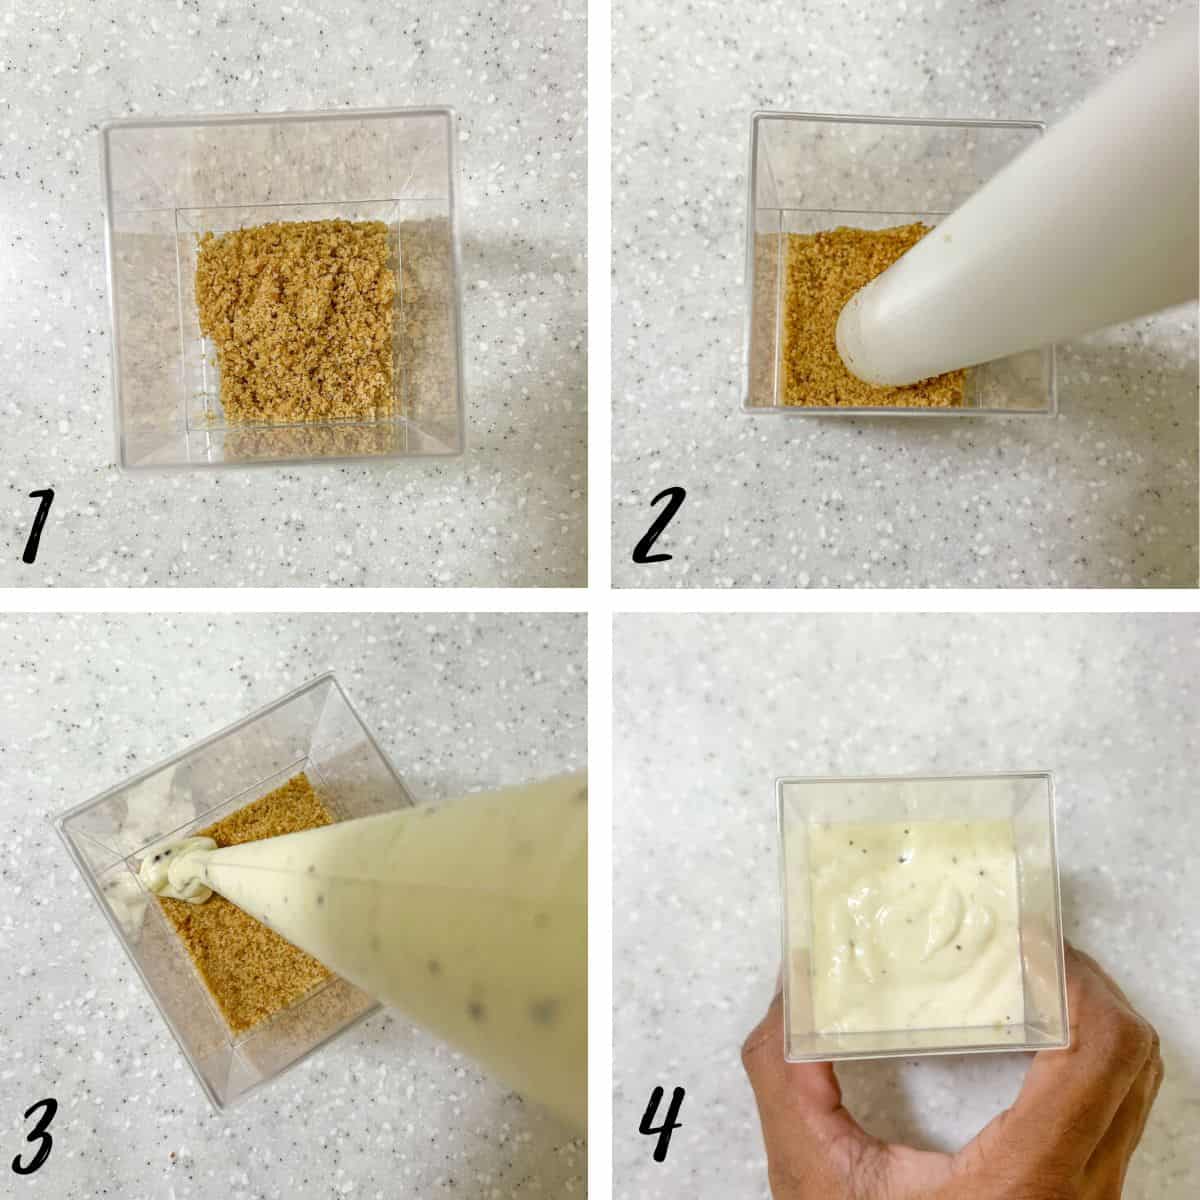 A poster of 4 images showing how to pipe cheesecake filling into cookie crumbs in cups.